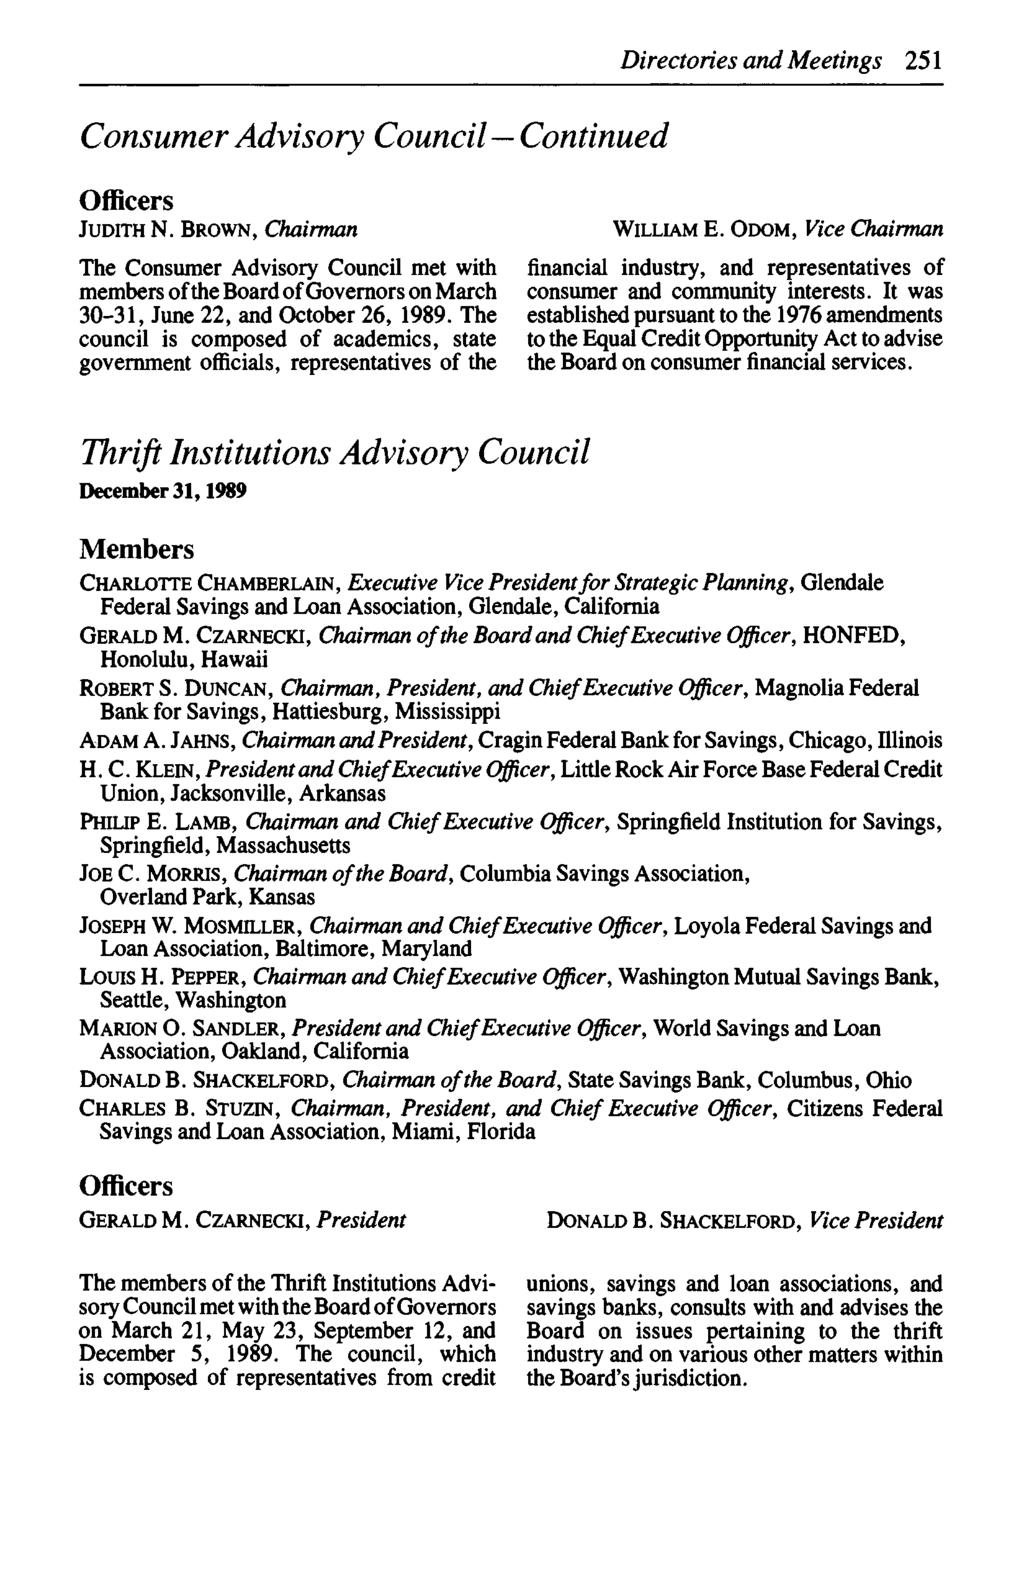 1989 Directories and Meetings 251 JUDITH N. BROWN, Chairman WILLIAM E.